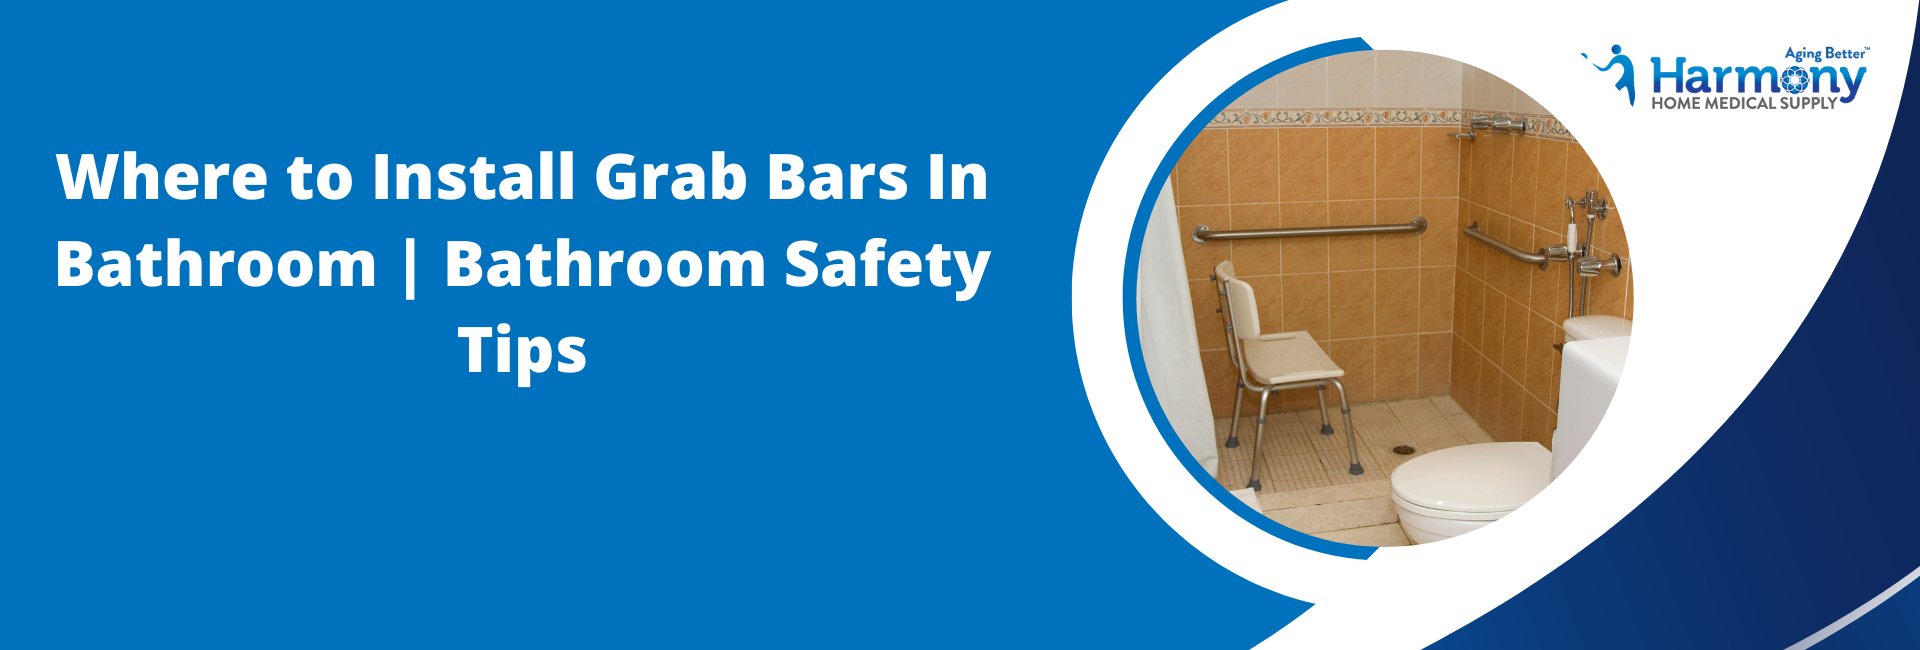 Where to Install Grab Bars In Bathroom | Bathroom Safety Tips